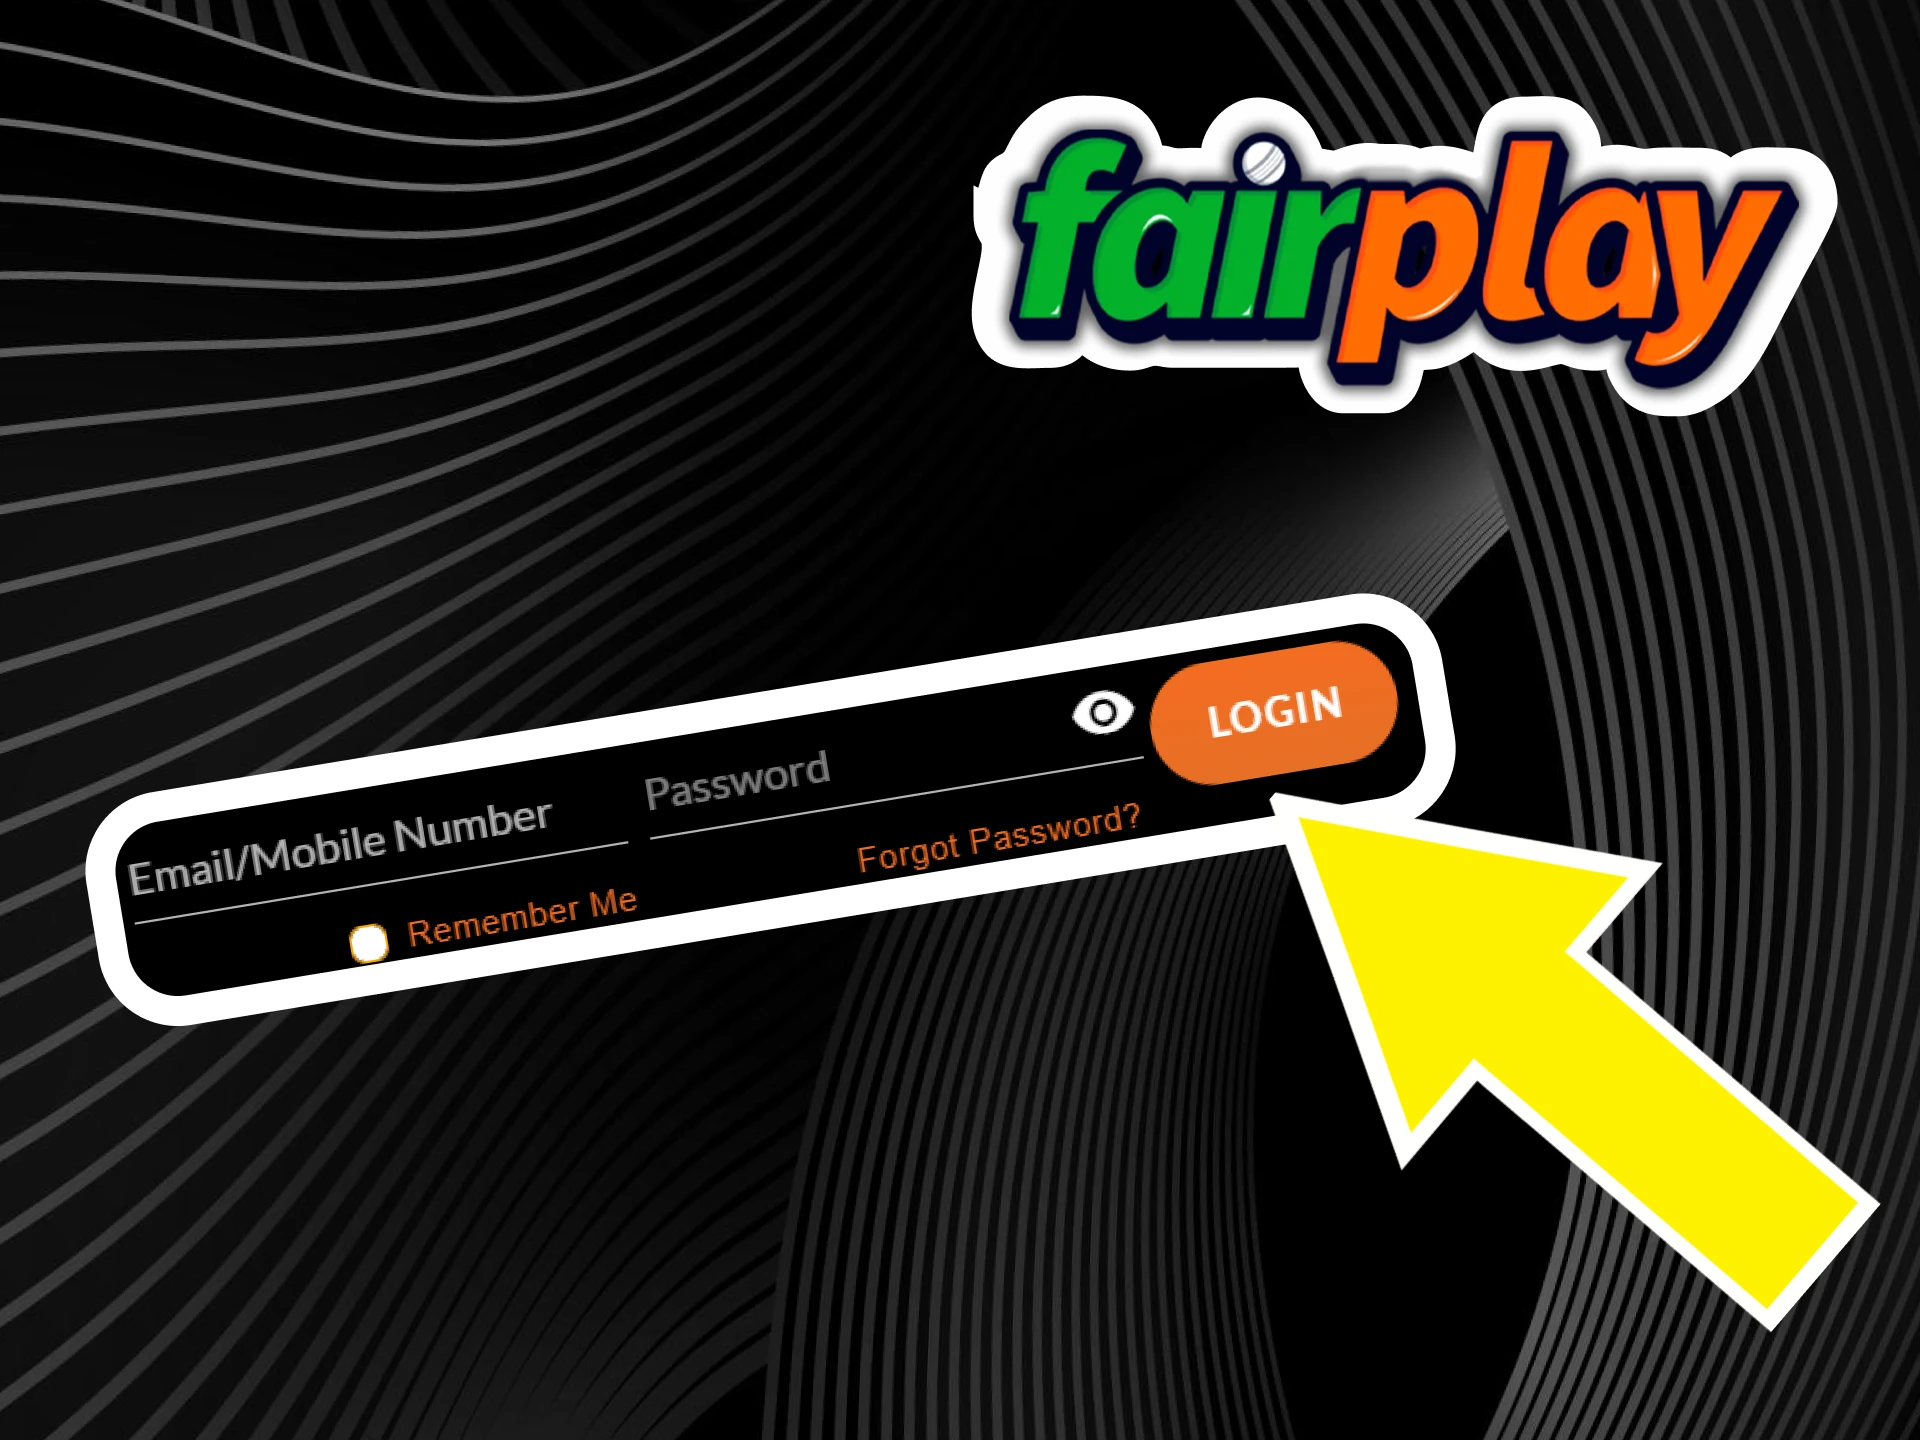 Log in to Fairplay using your username and password.